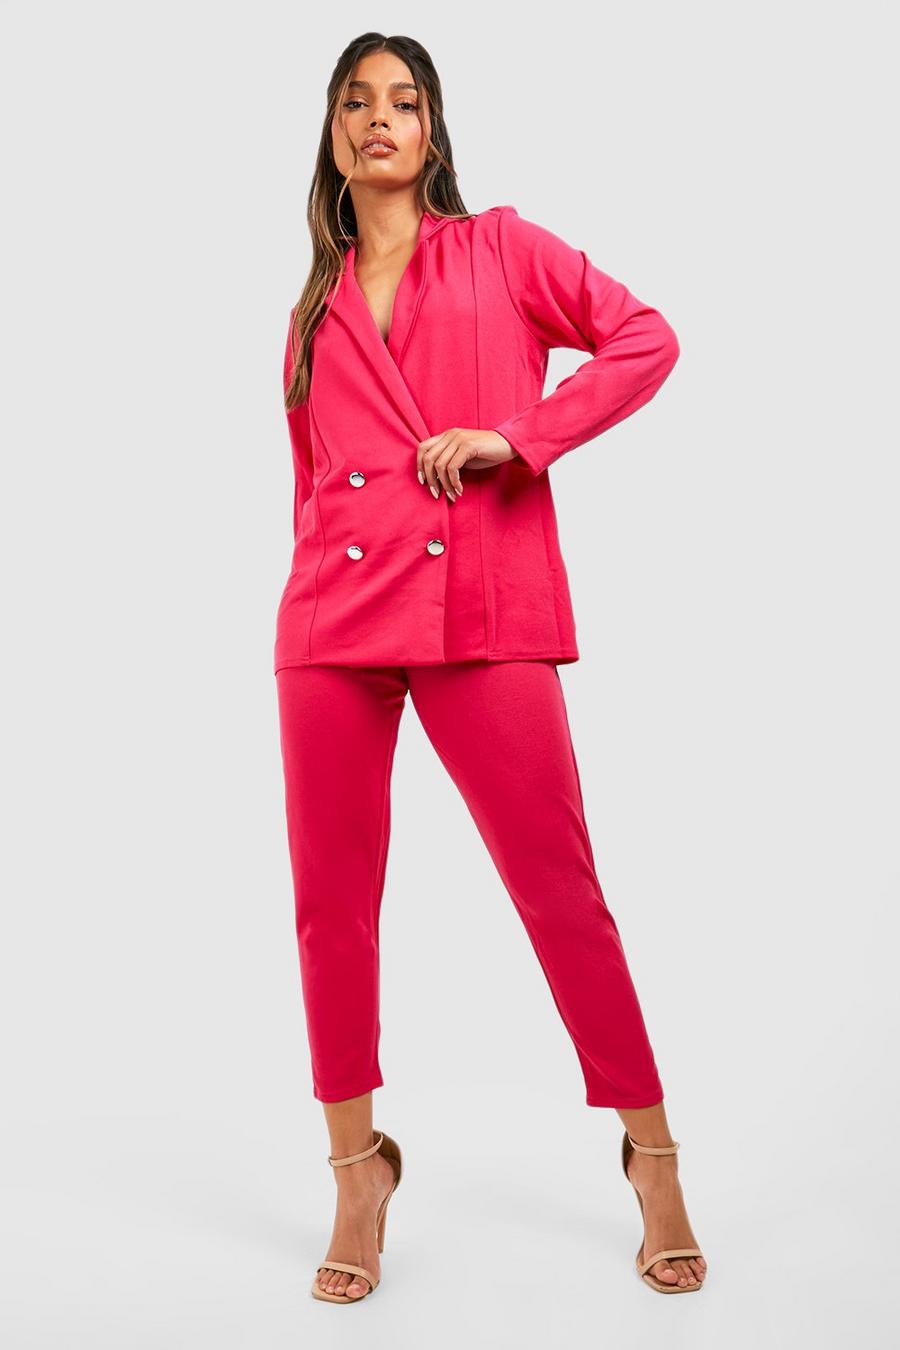 Hot pink Jersey Knit Double Breasted Blazer And Pants Suit Set